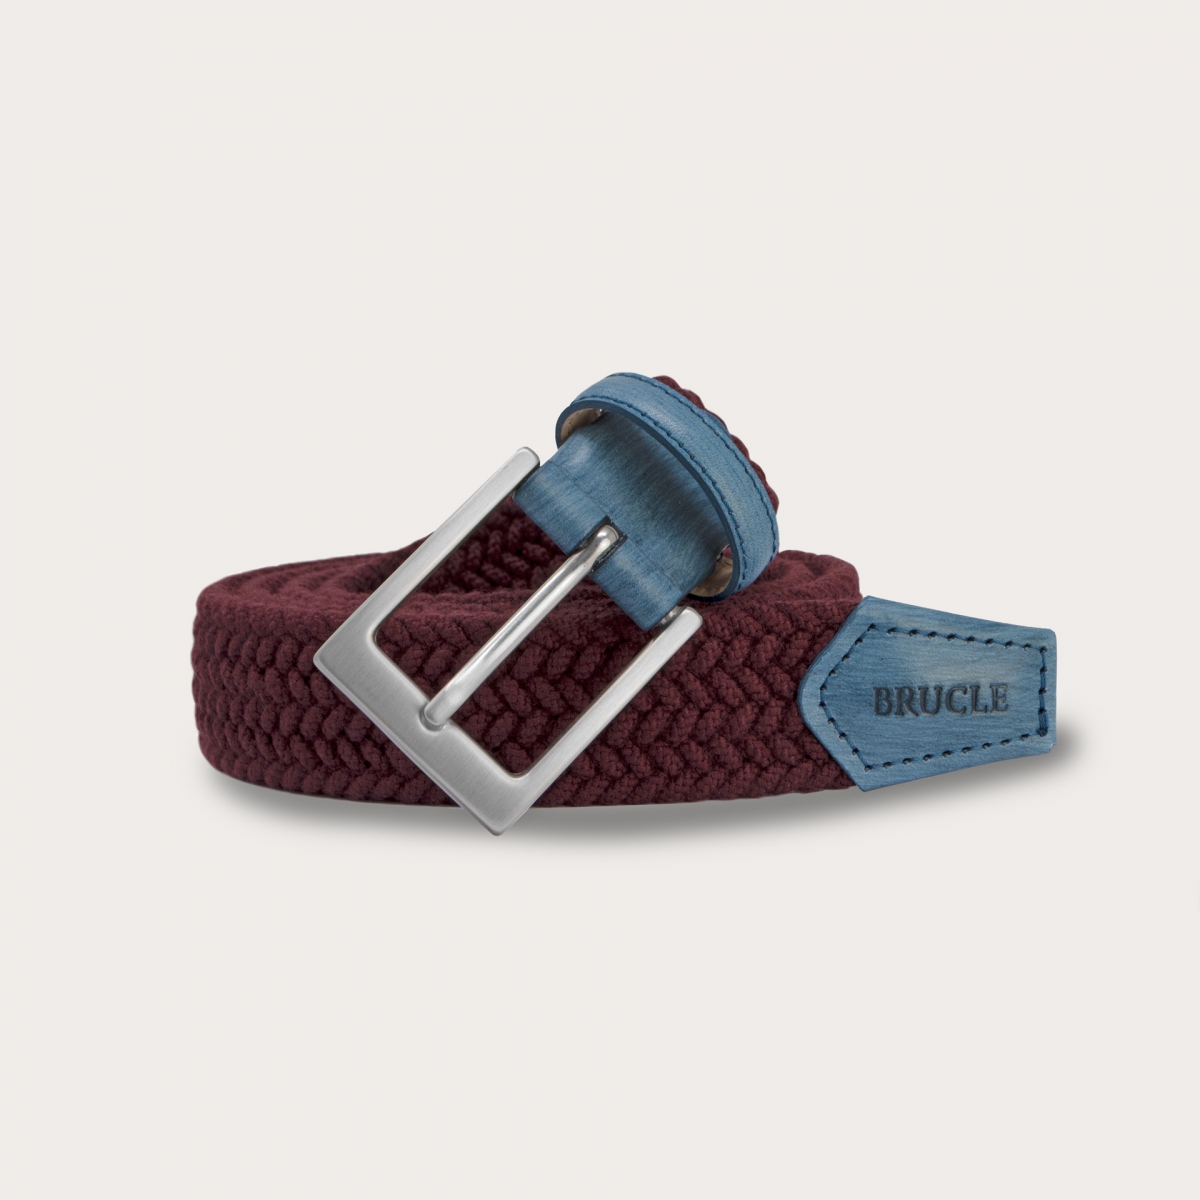 Braided elastic belt in burgundy wool with light blue leather